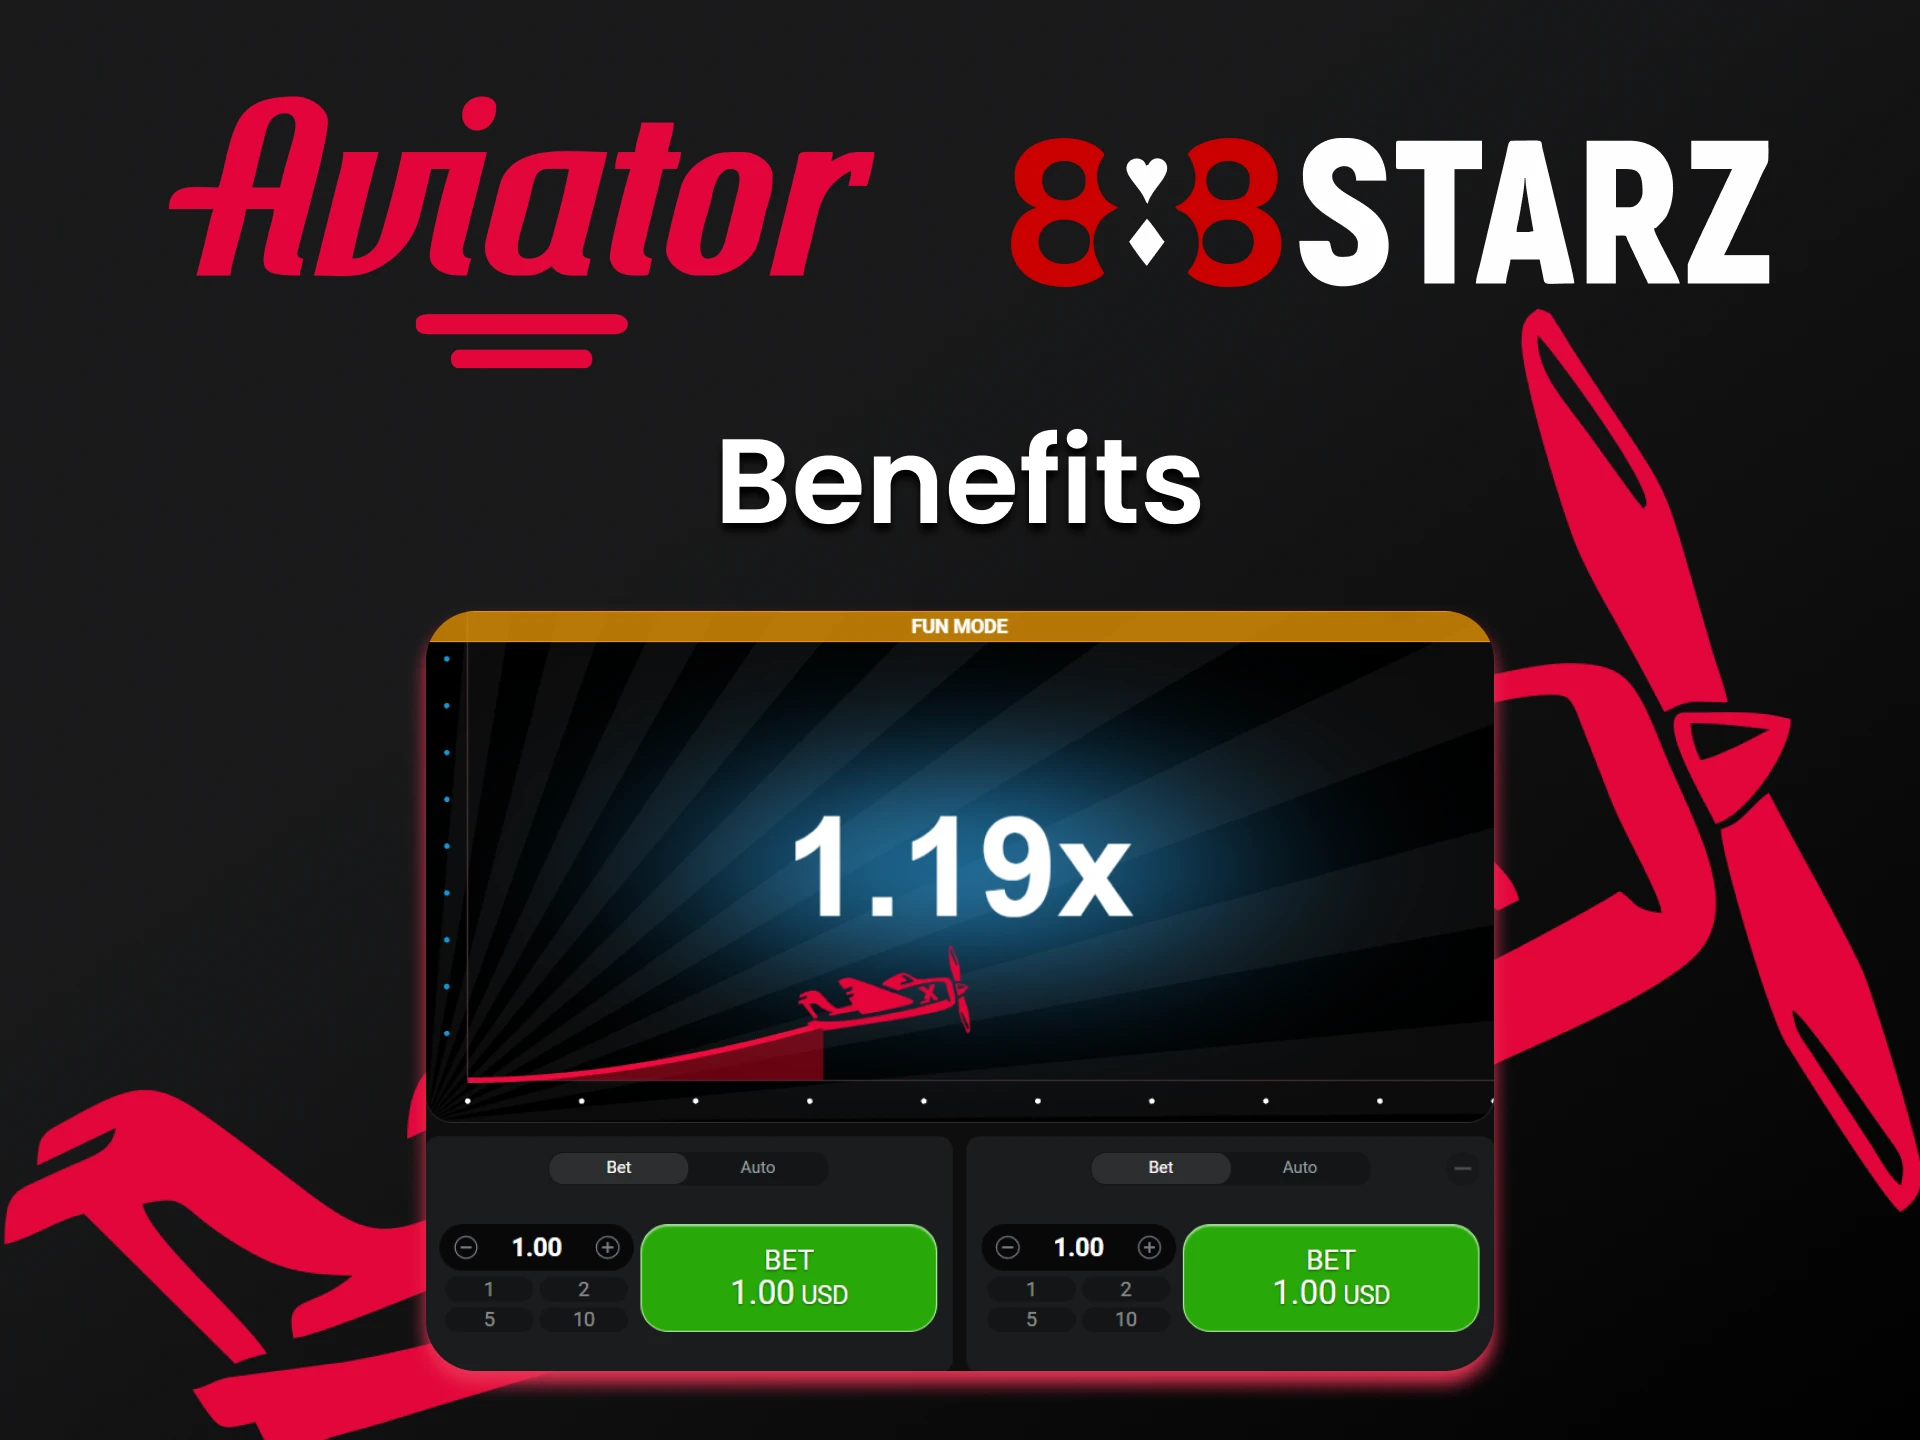 By playing Aviator on 888starz you will get a lot of benefits.